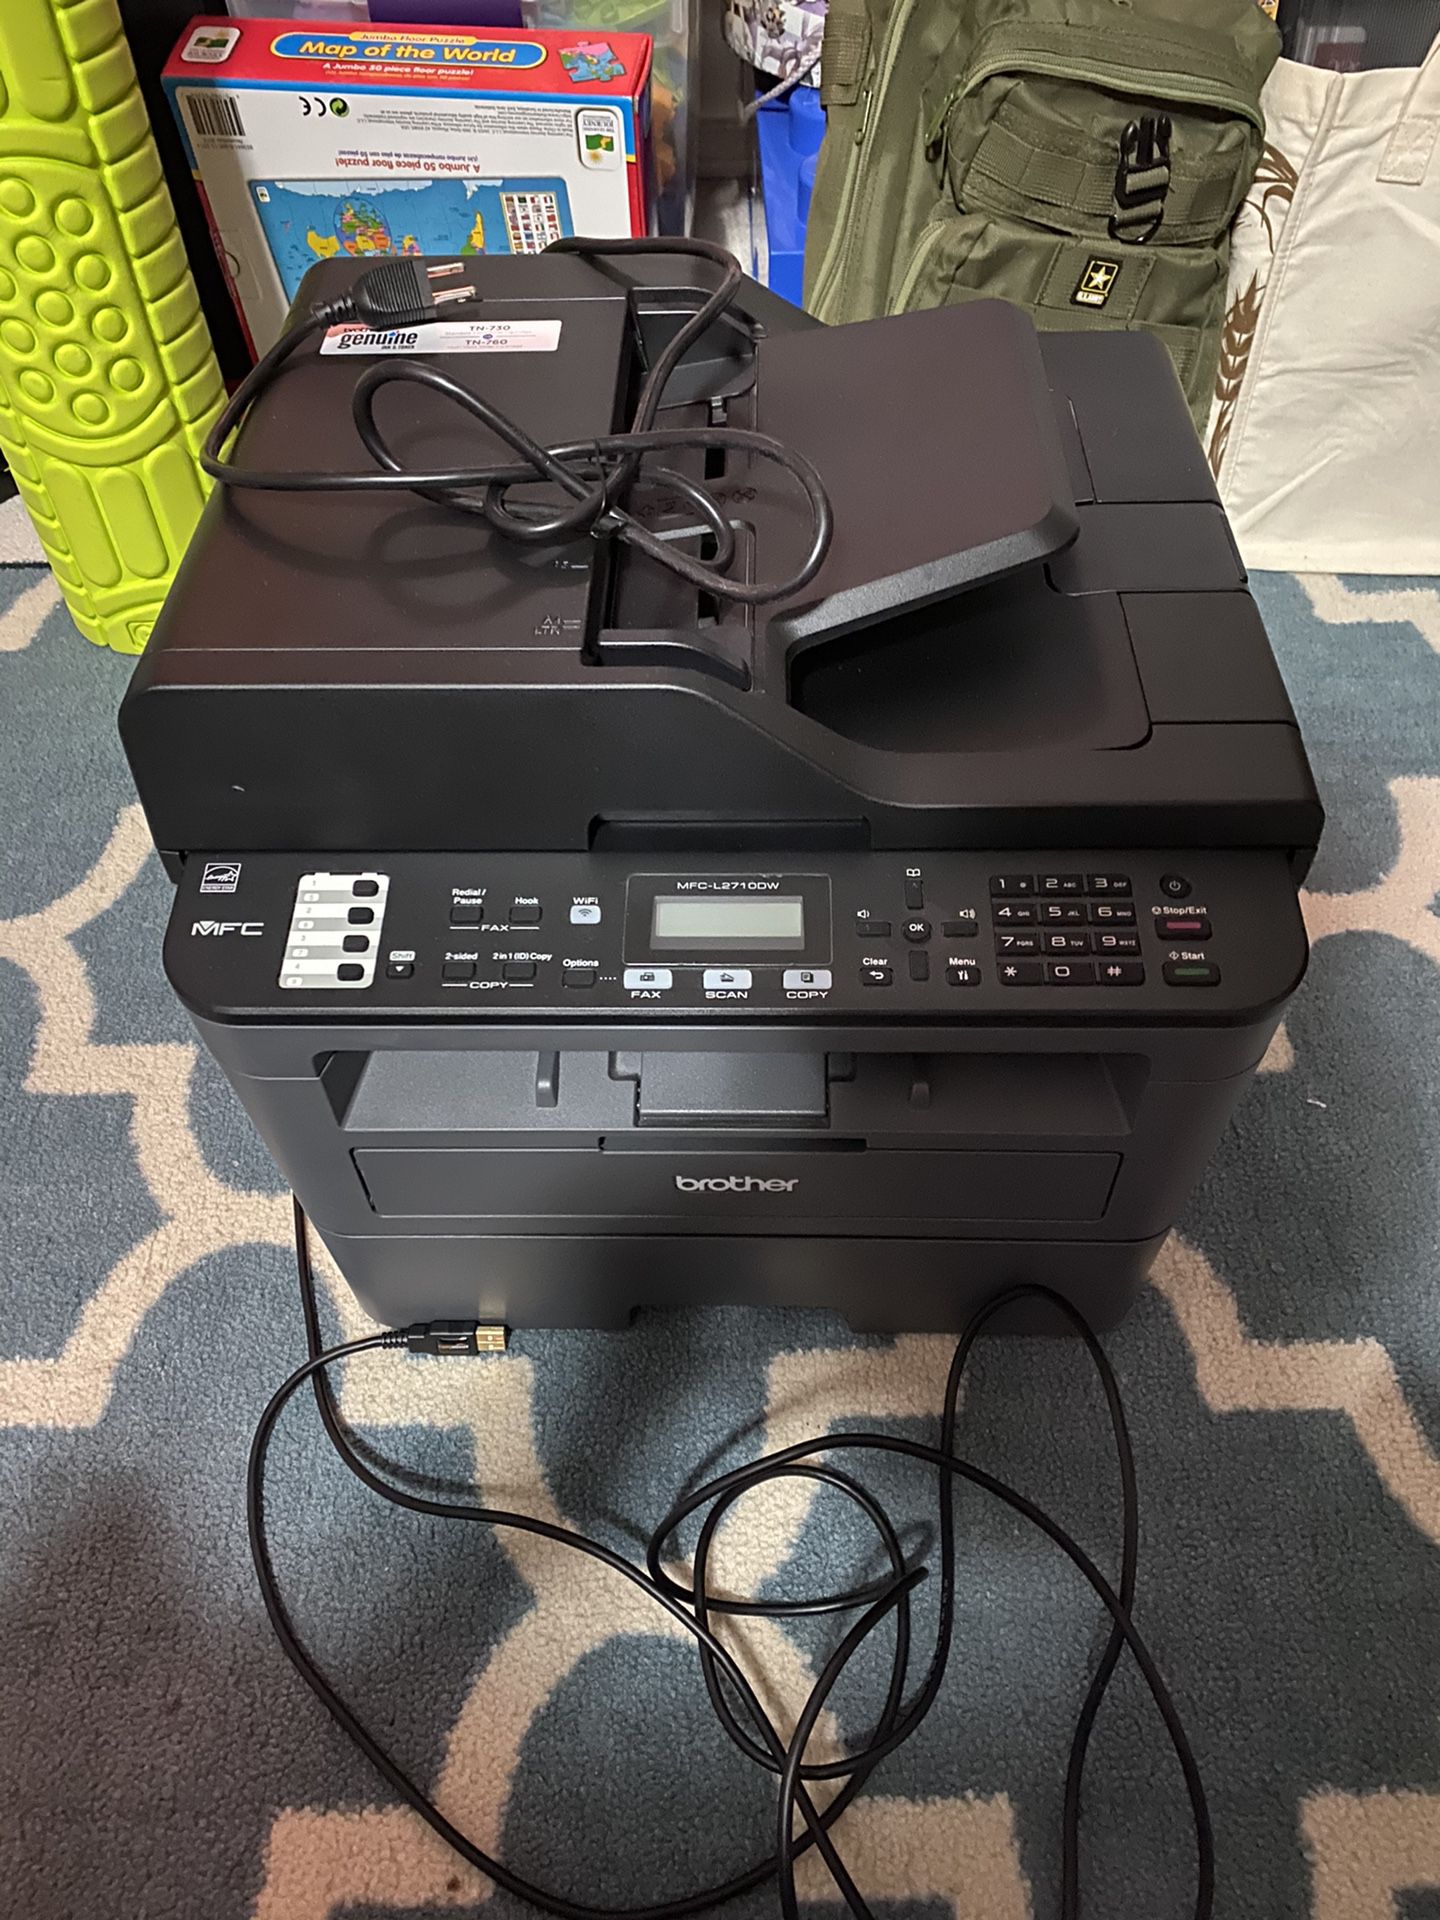 BROTHER Printer/Scan/Fax $150 OBO